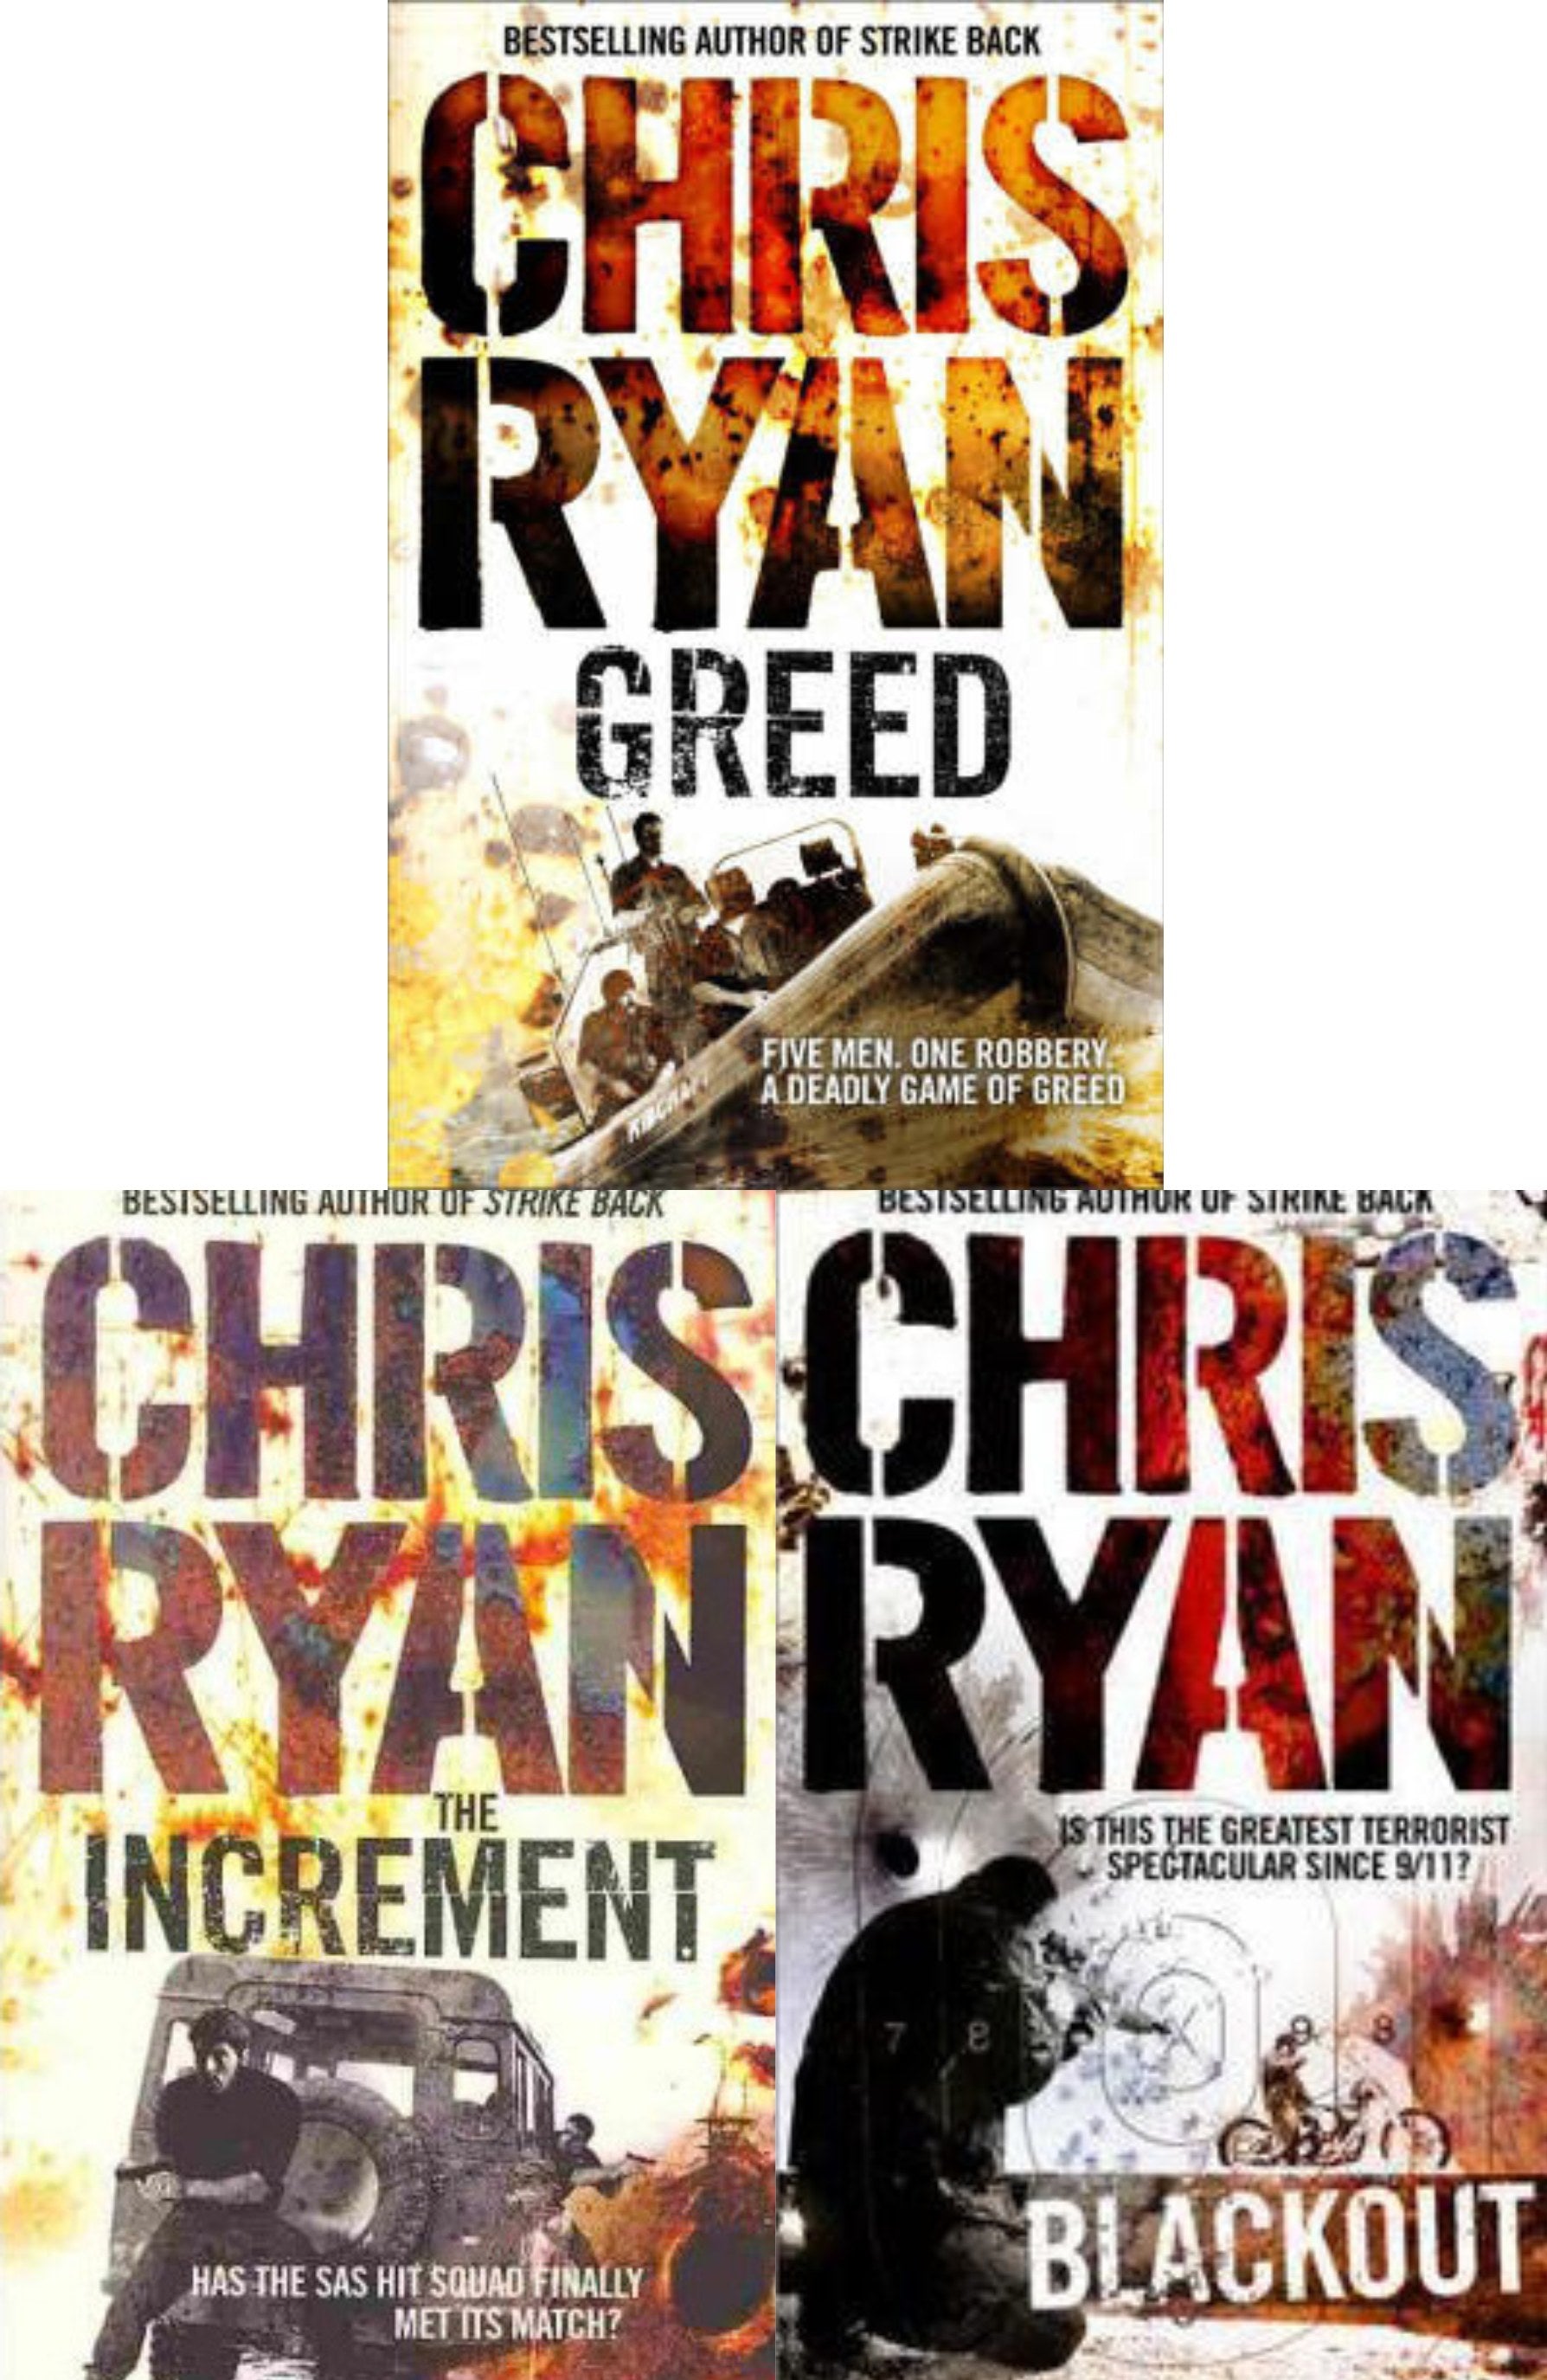 Chris Ryan Gift Set.Blackout,Greed and the Increment.